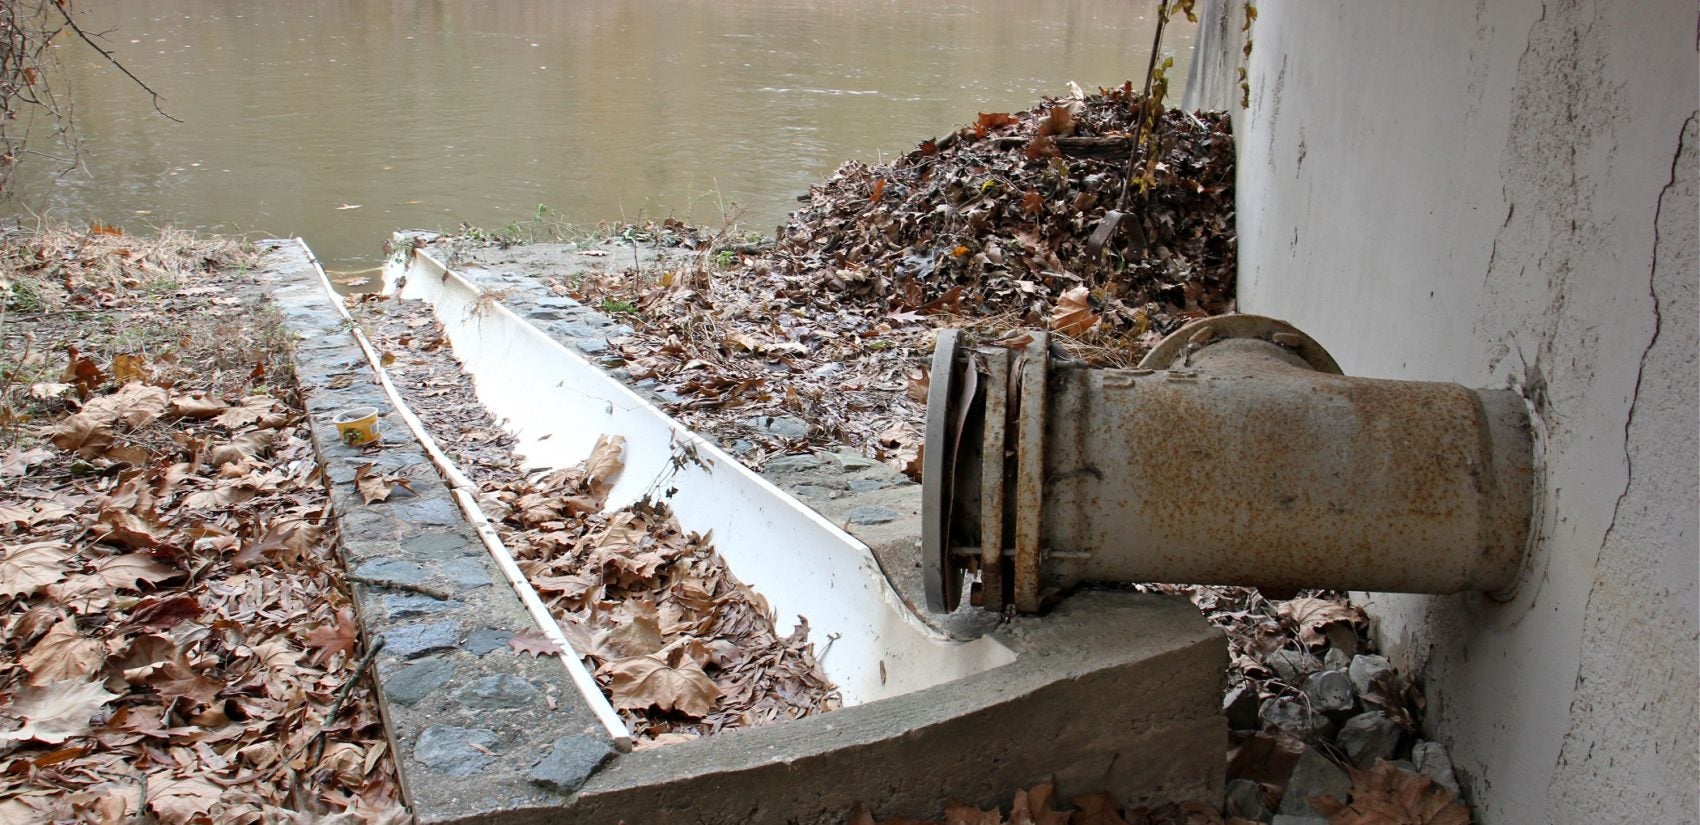 A discharge pipe at the W. Compton Wills Pumping Station empties into the Brandywine Creek in Wilmington. (Emma Lee/WHYY)